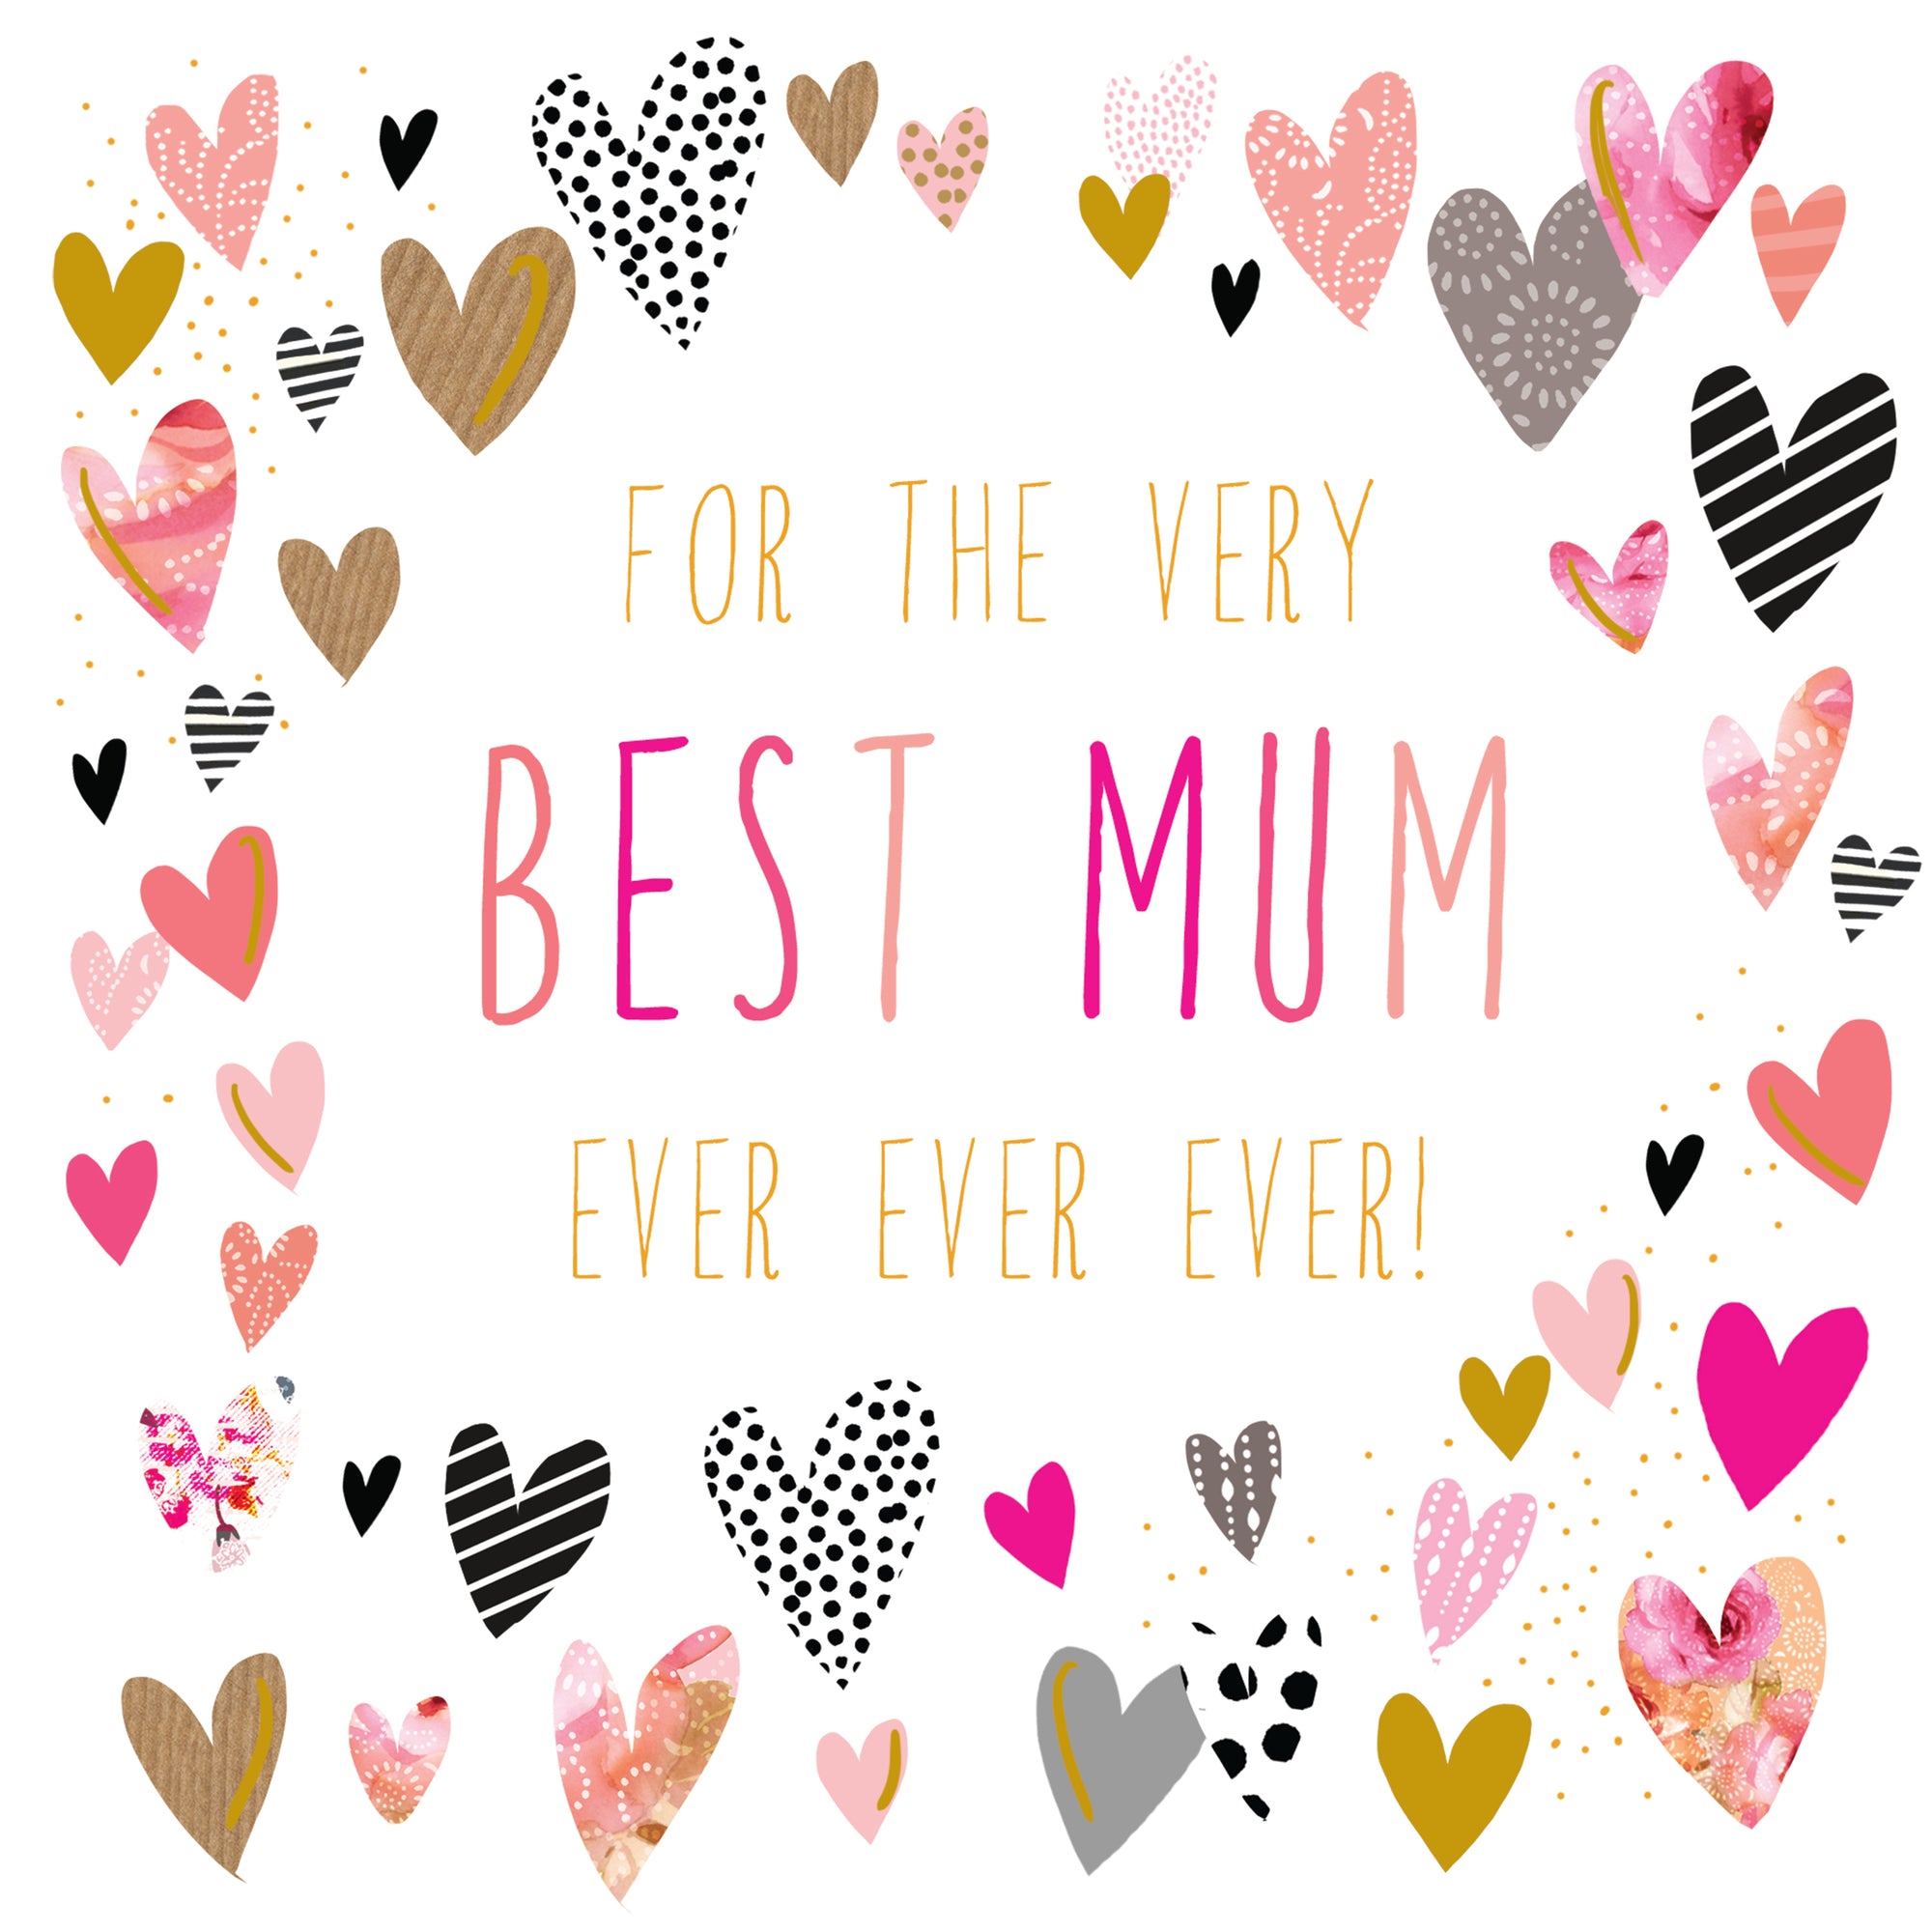 Very Best Mum Ever Hearts Mother's Day Card by penny black